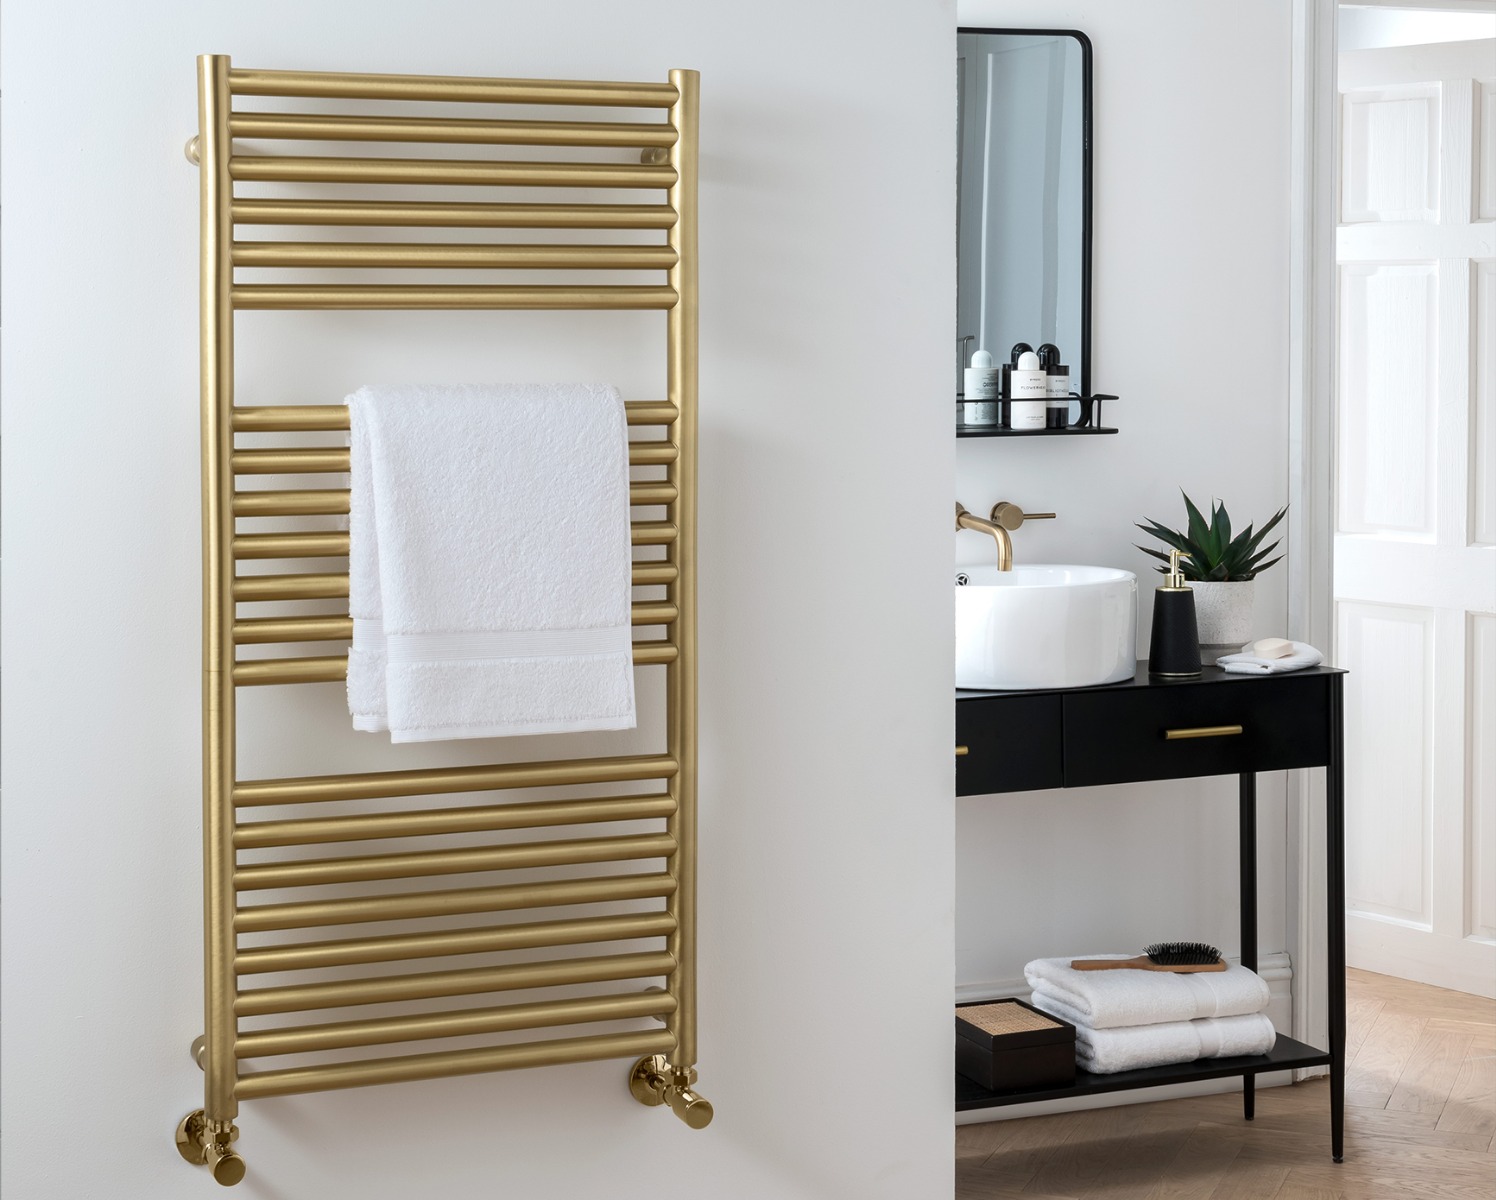 Ladder Rails Studio Heating Only Non-lacquered - Brushed Brass 720x500